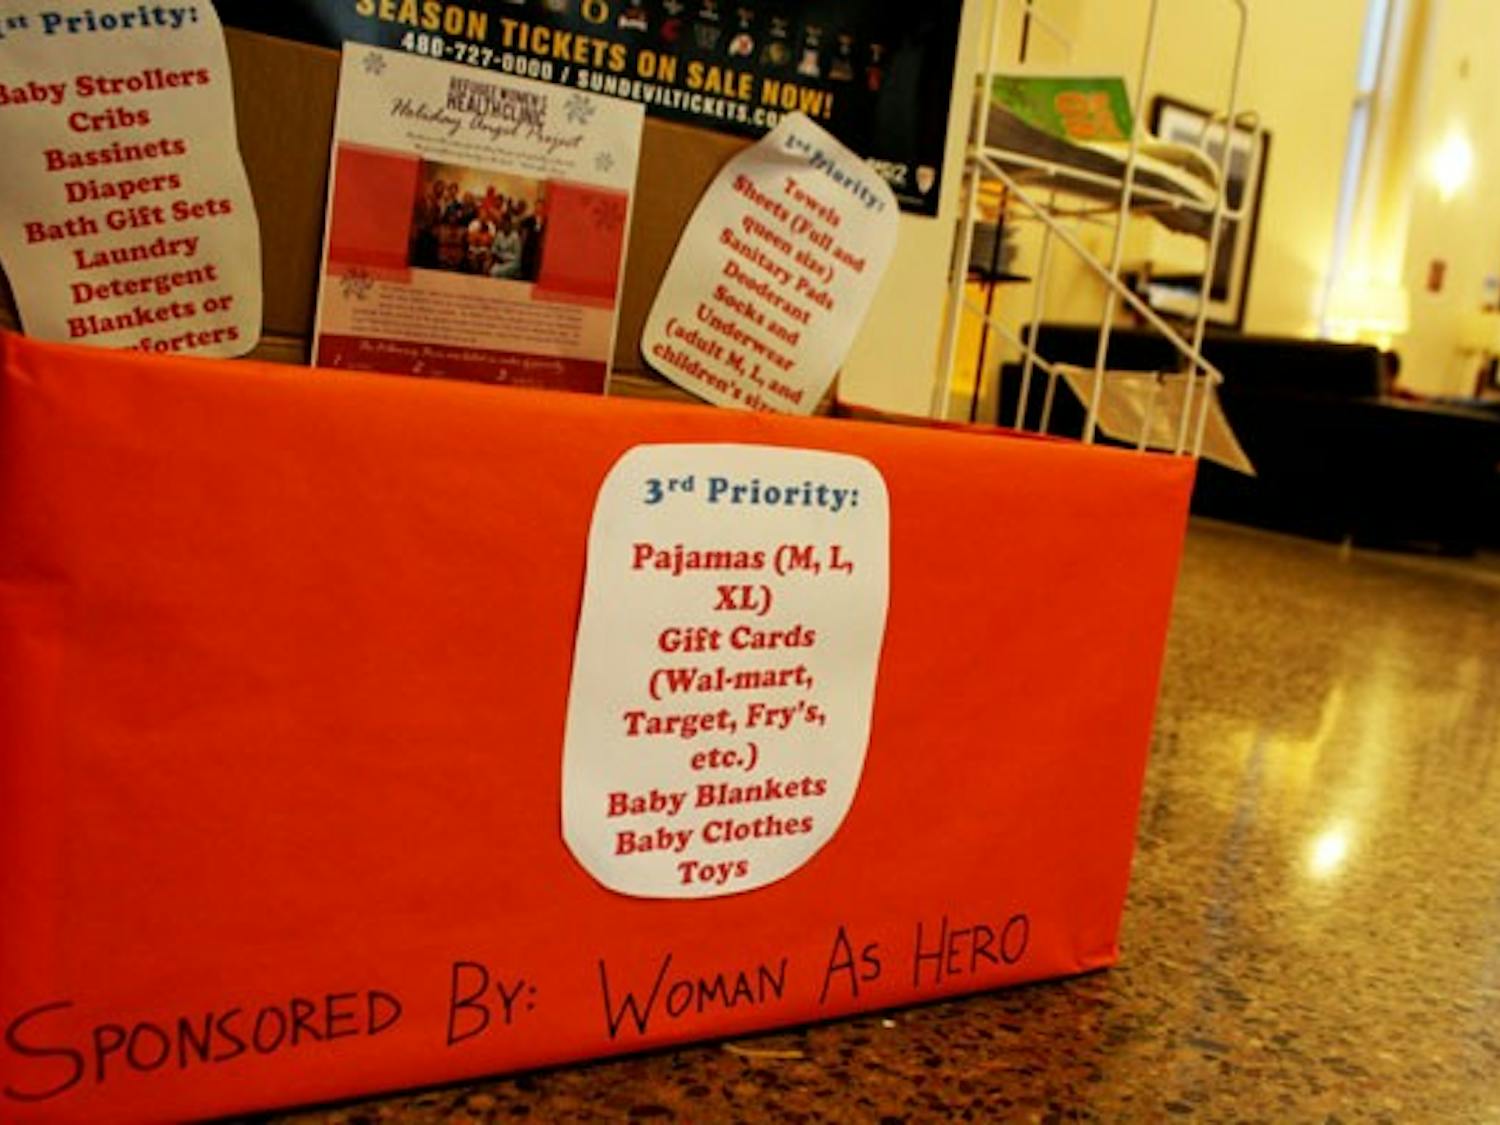 Woman As Hero is one of many student organizations that is collecting donations this holiday season. The group has set up stations around campus where the ASU community can donate clothes and apparel that will go to women refugees. (Photo by Jessie Wardarski)